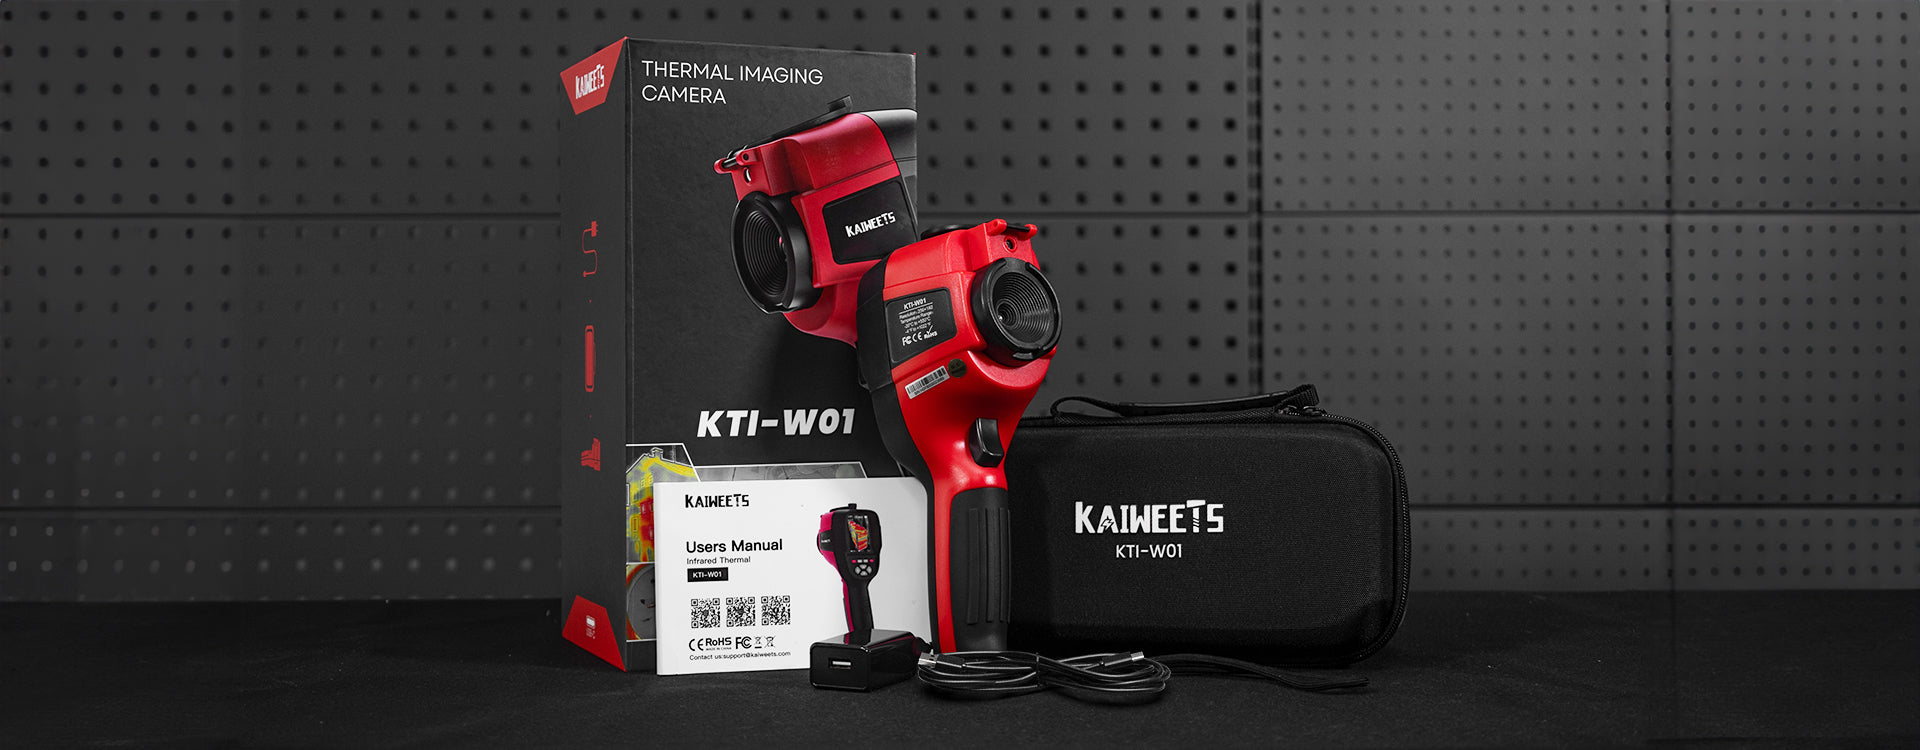 KAIWEETS KTI-W01 thermal imaging camera is packaged in a beautiful gift box